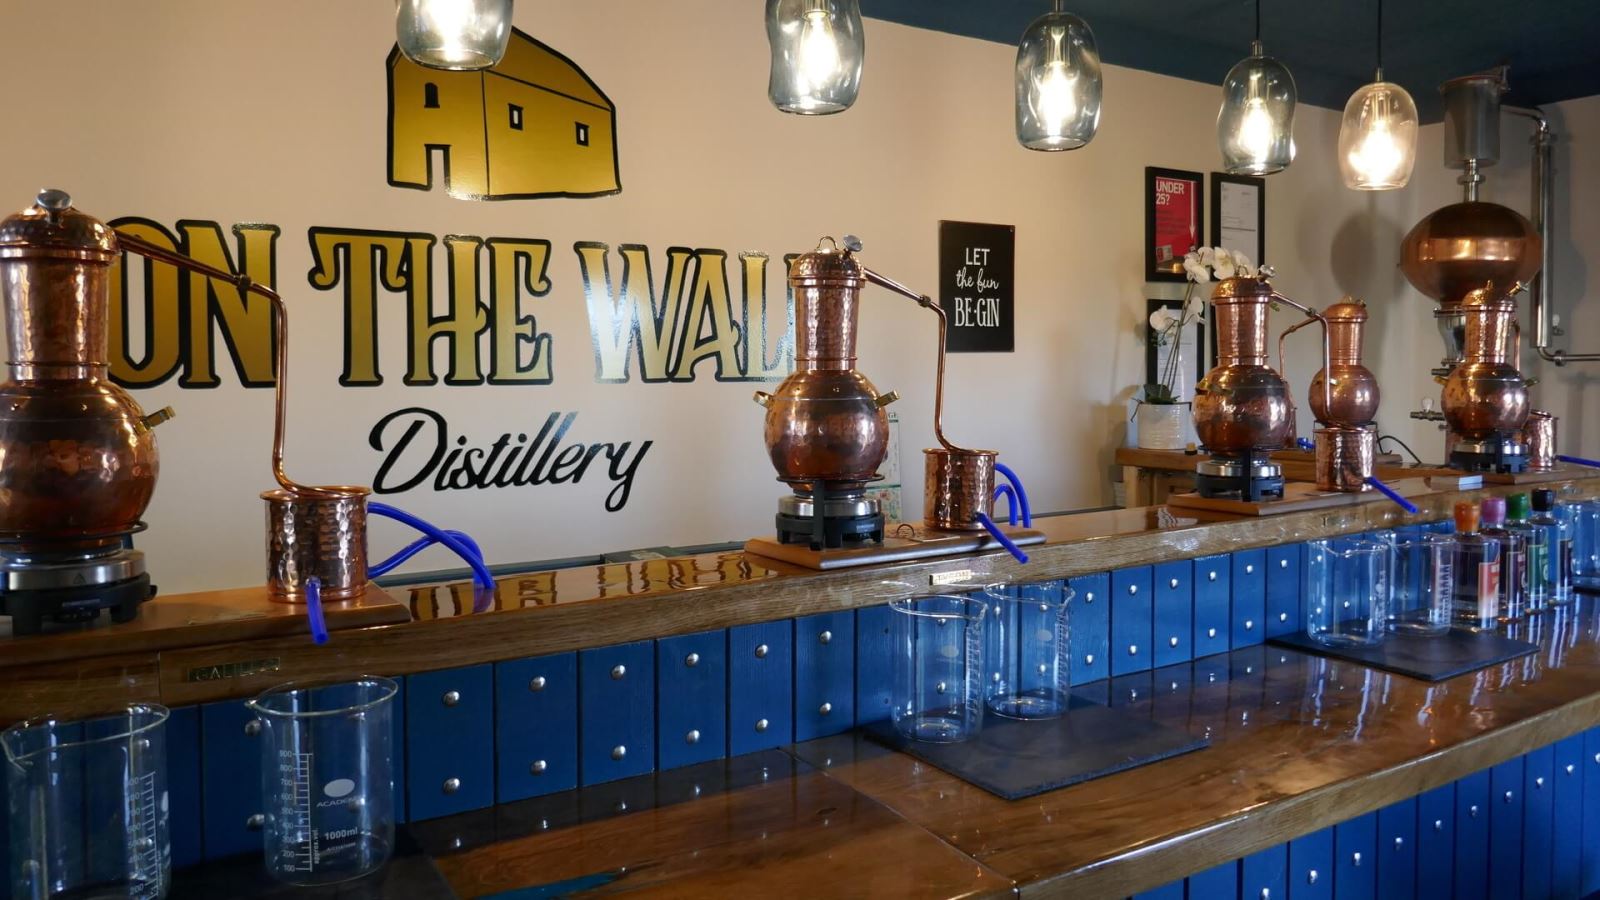 On The Wall Distillery